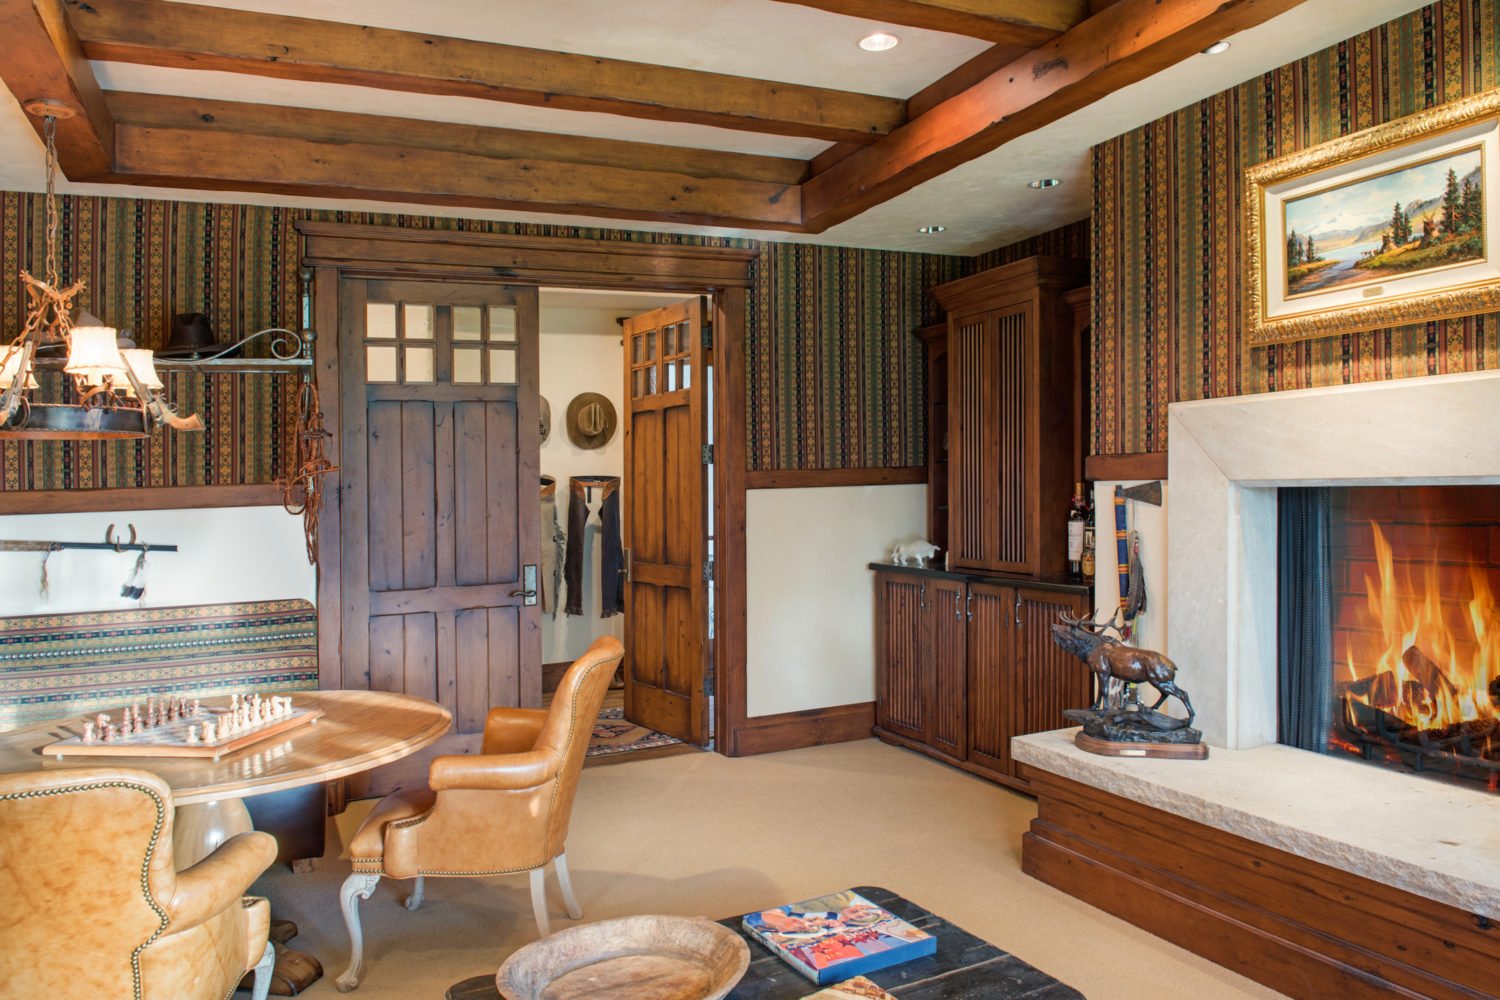 A wood-paneled room with a chess table and fireplace